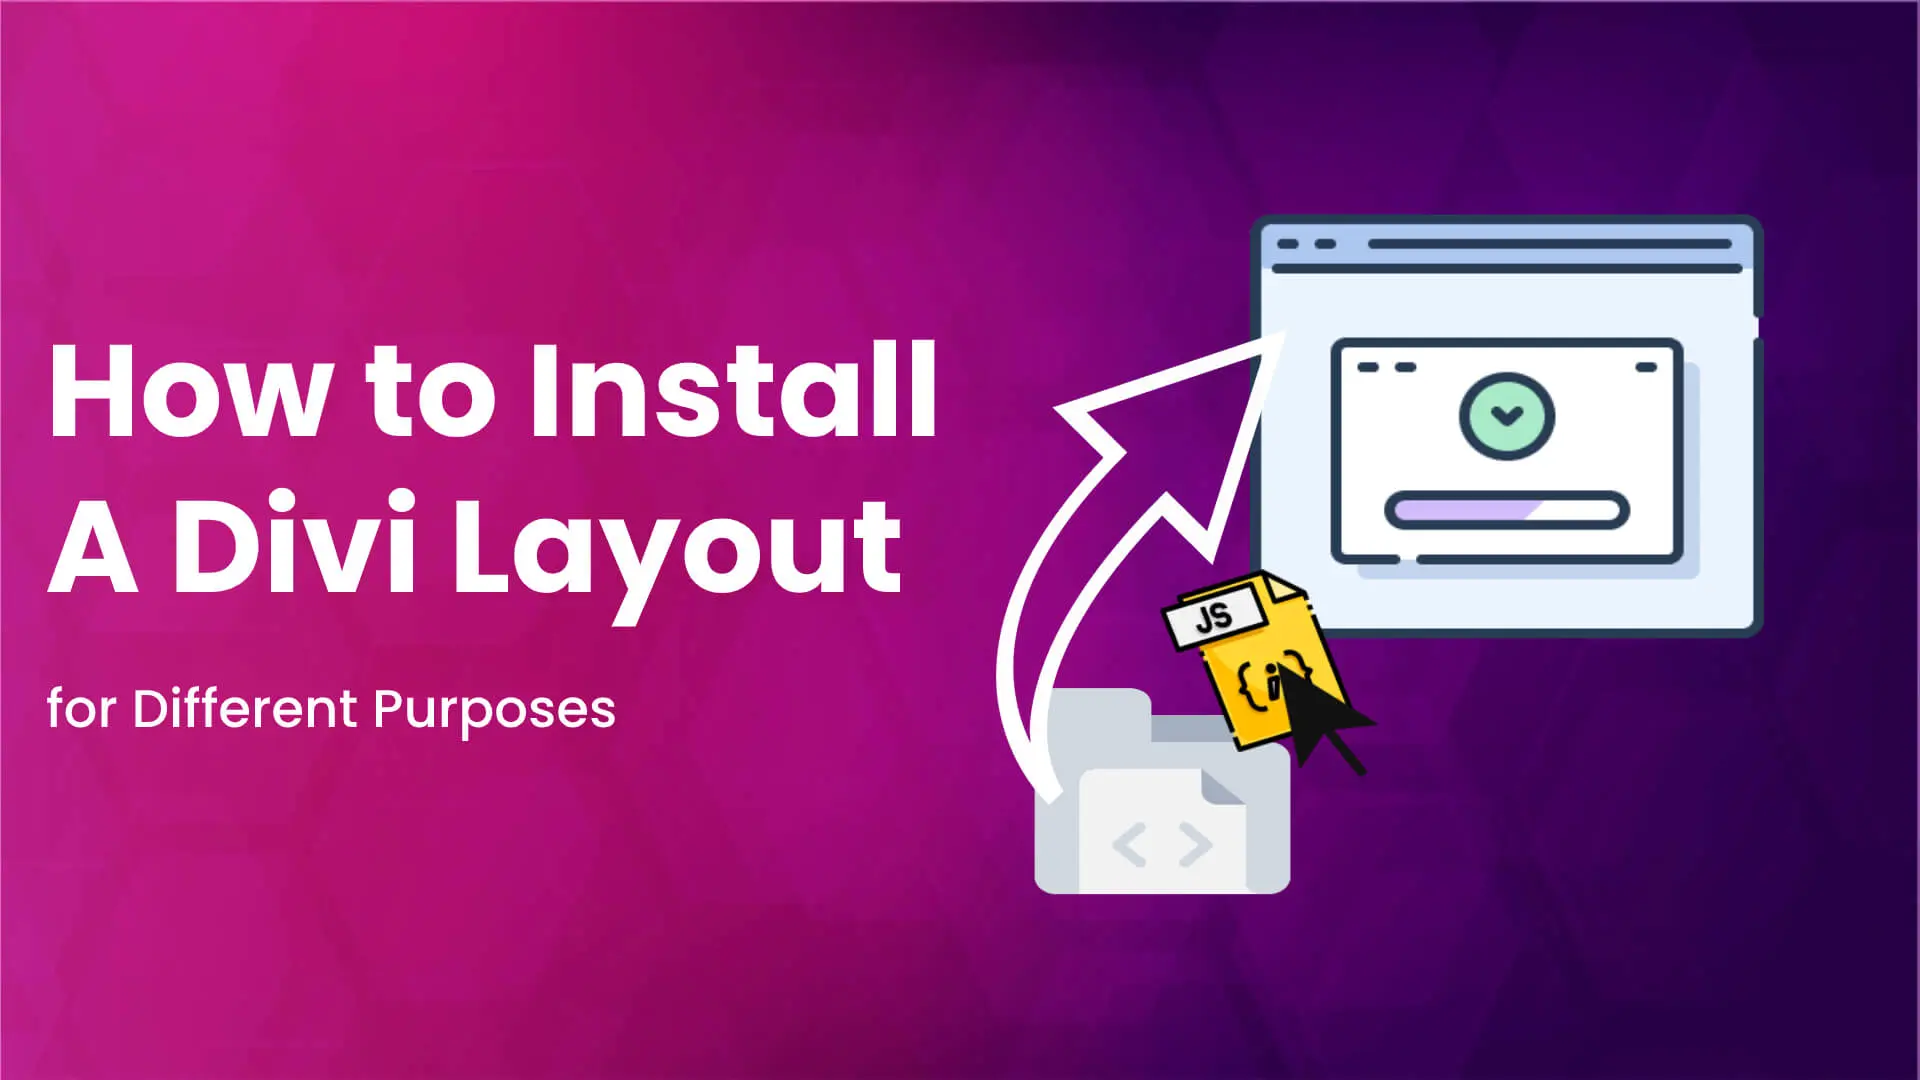 How to install a Divi layout for different purposes